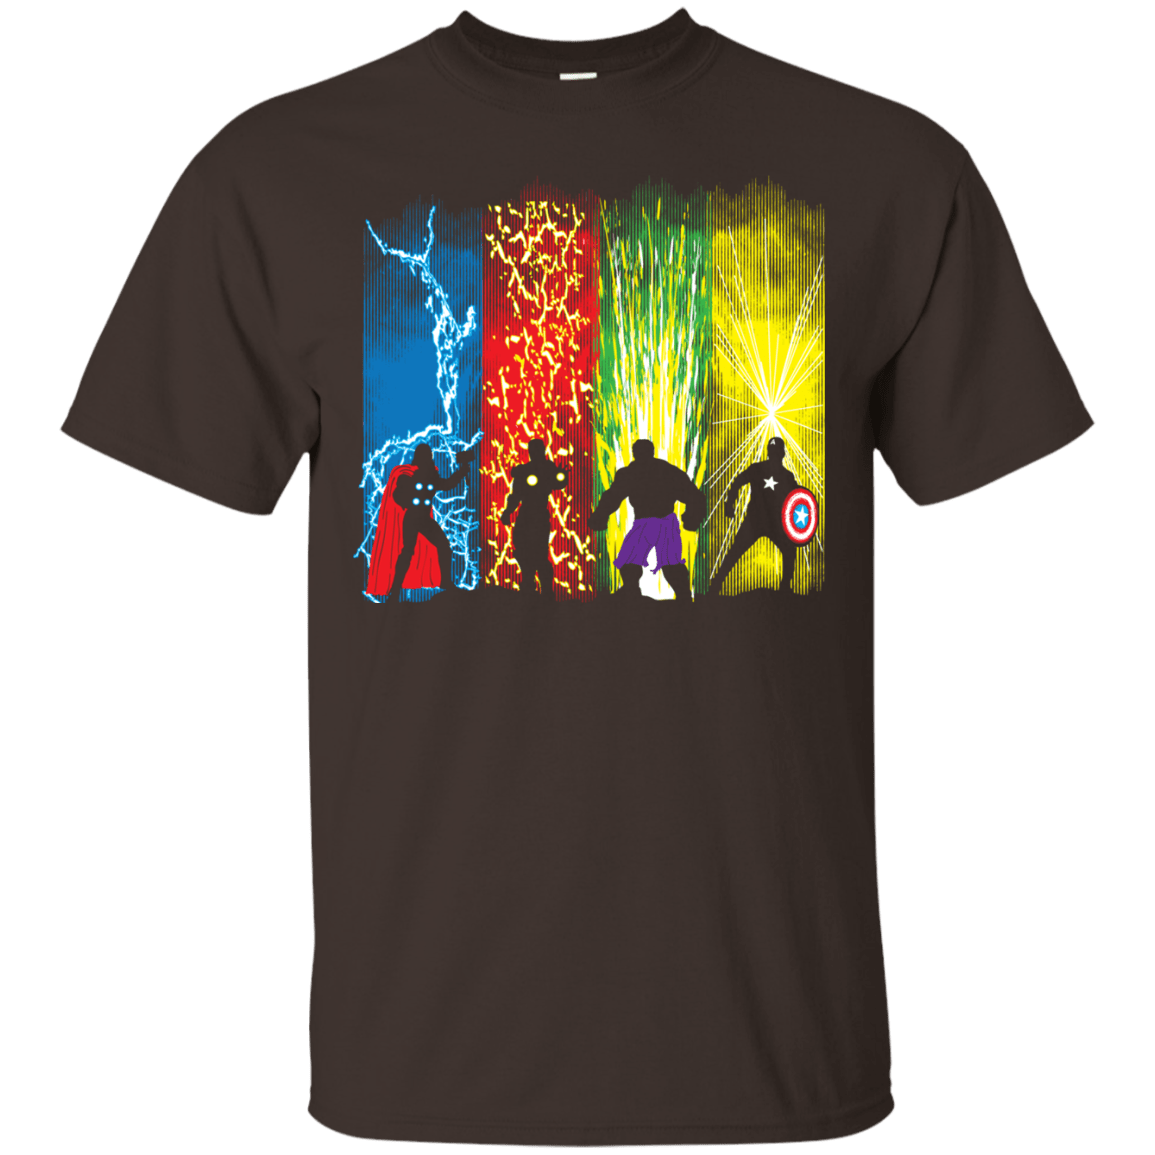 T-Shirts Dark Chocolate / S Justice Prevails T-Shirt